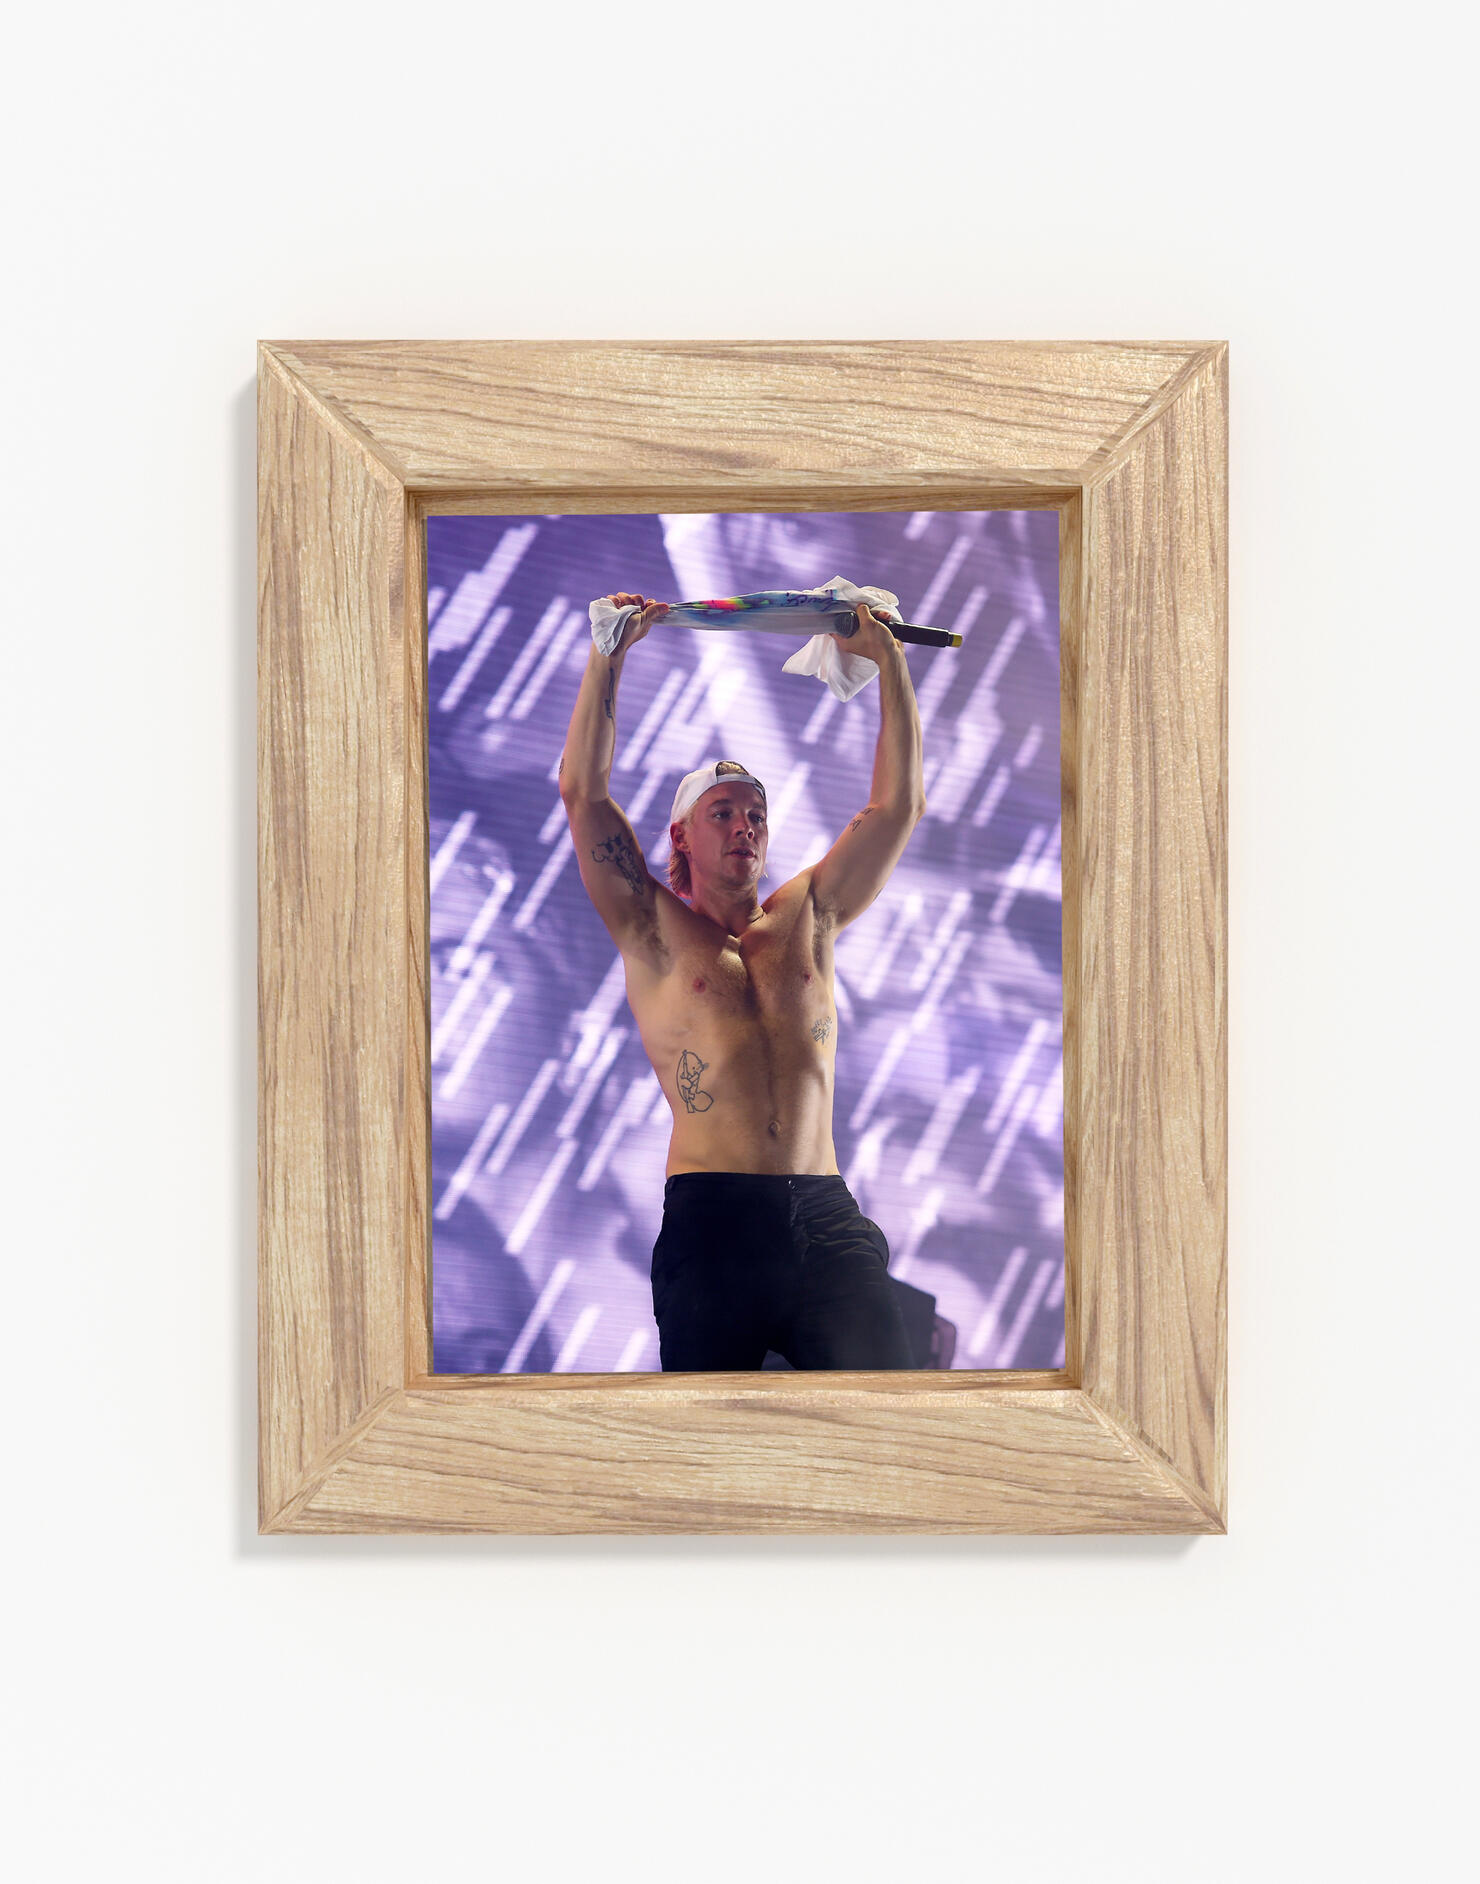 A framed picture of Diplo